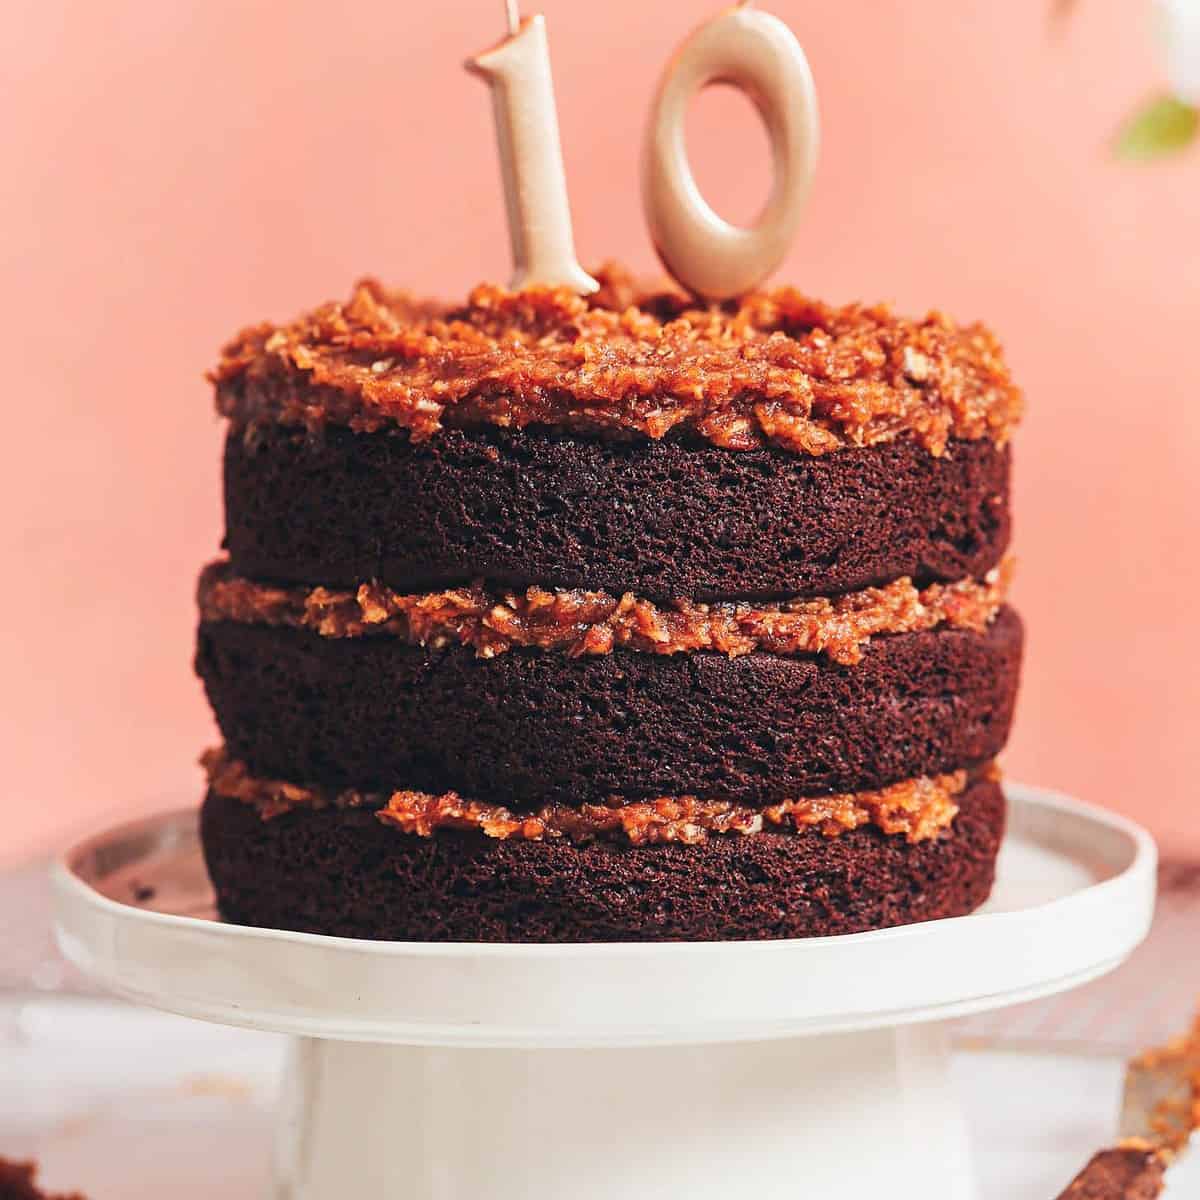  You won't believe this gluten-free cake is actually good for you.